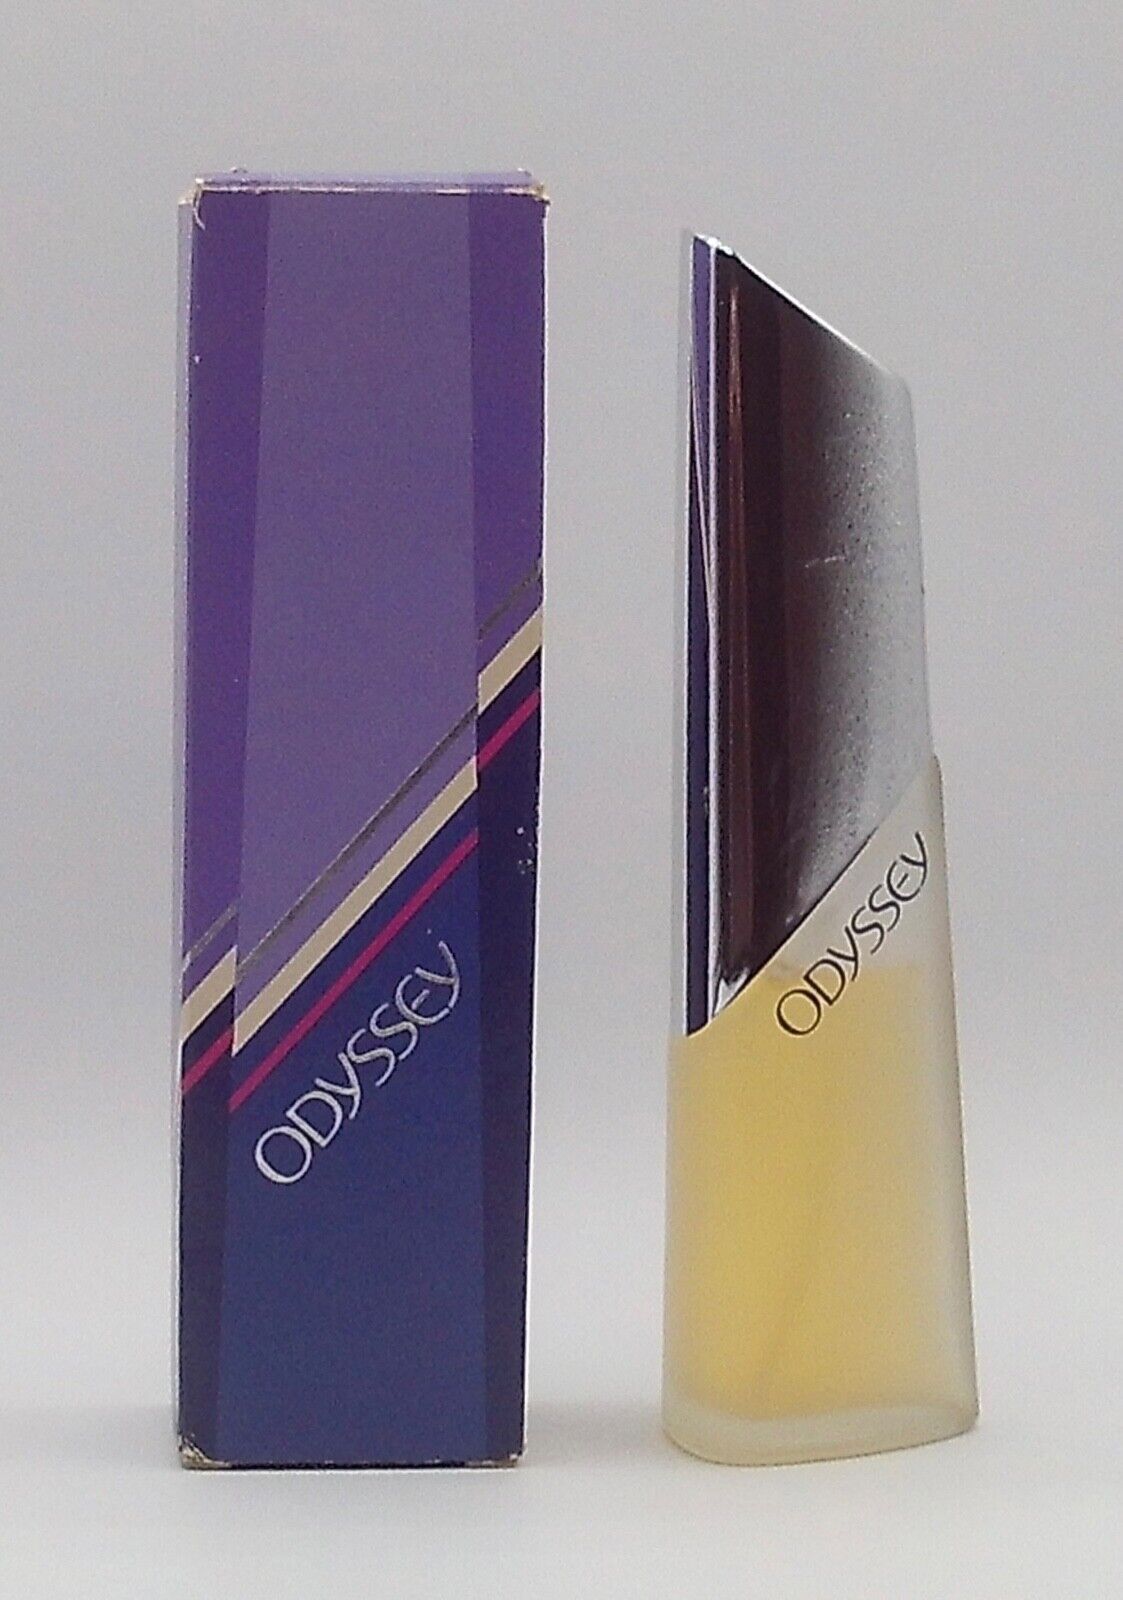 Vintage Avon Odyssey Ultra Cologne Spray 1.8 oz. in Box About 60% Full